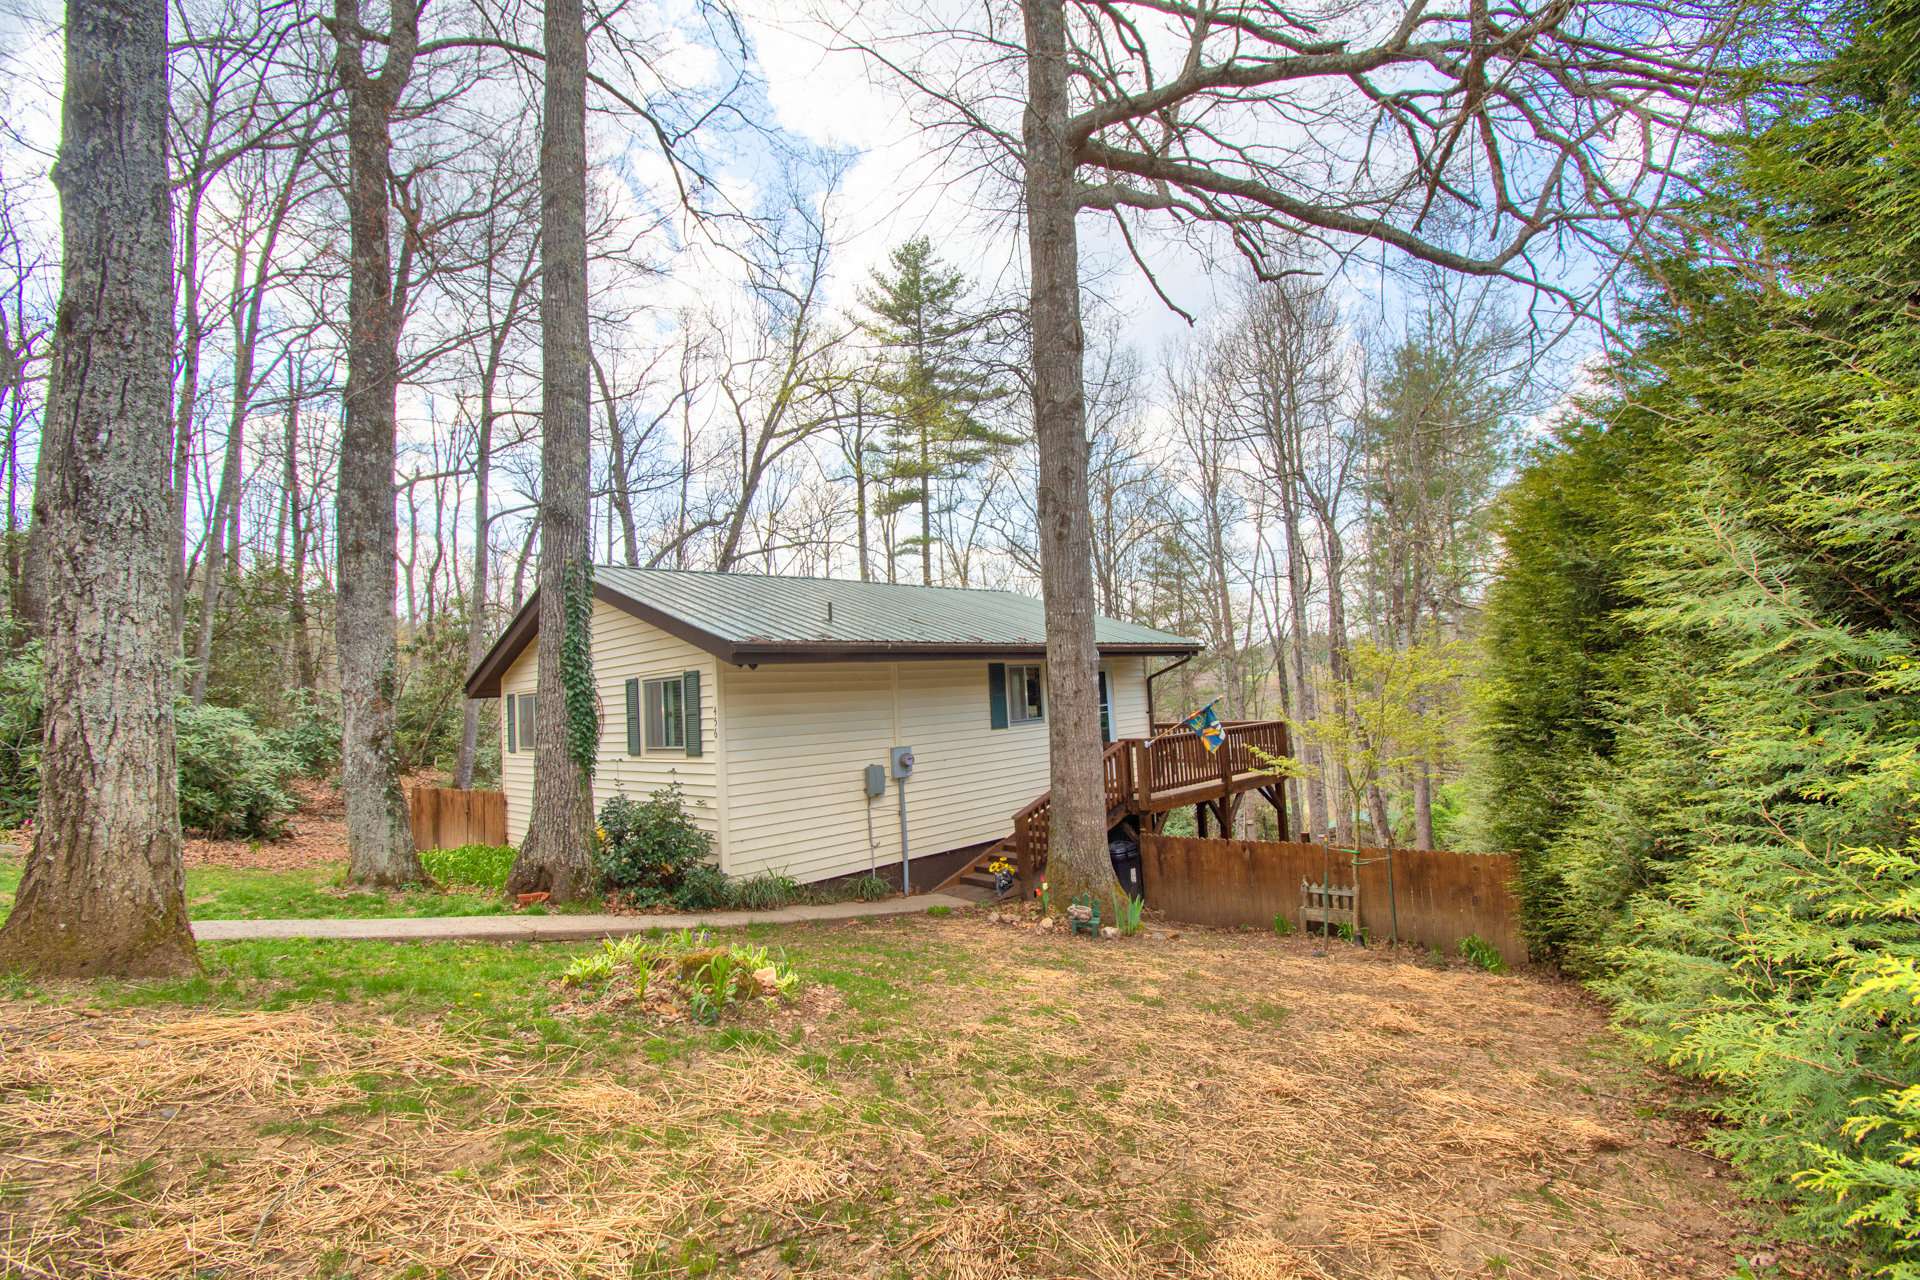 This sweet 1-bedroom, 1-bath mountain cottage nestled in a wooded setting has a successful vacation rental history.